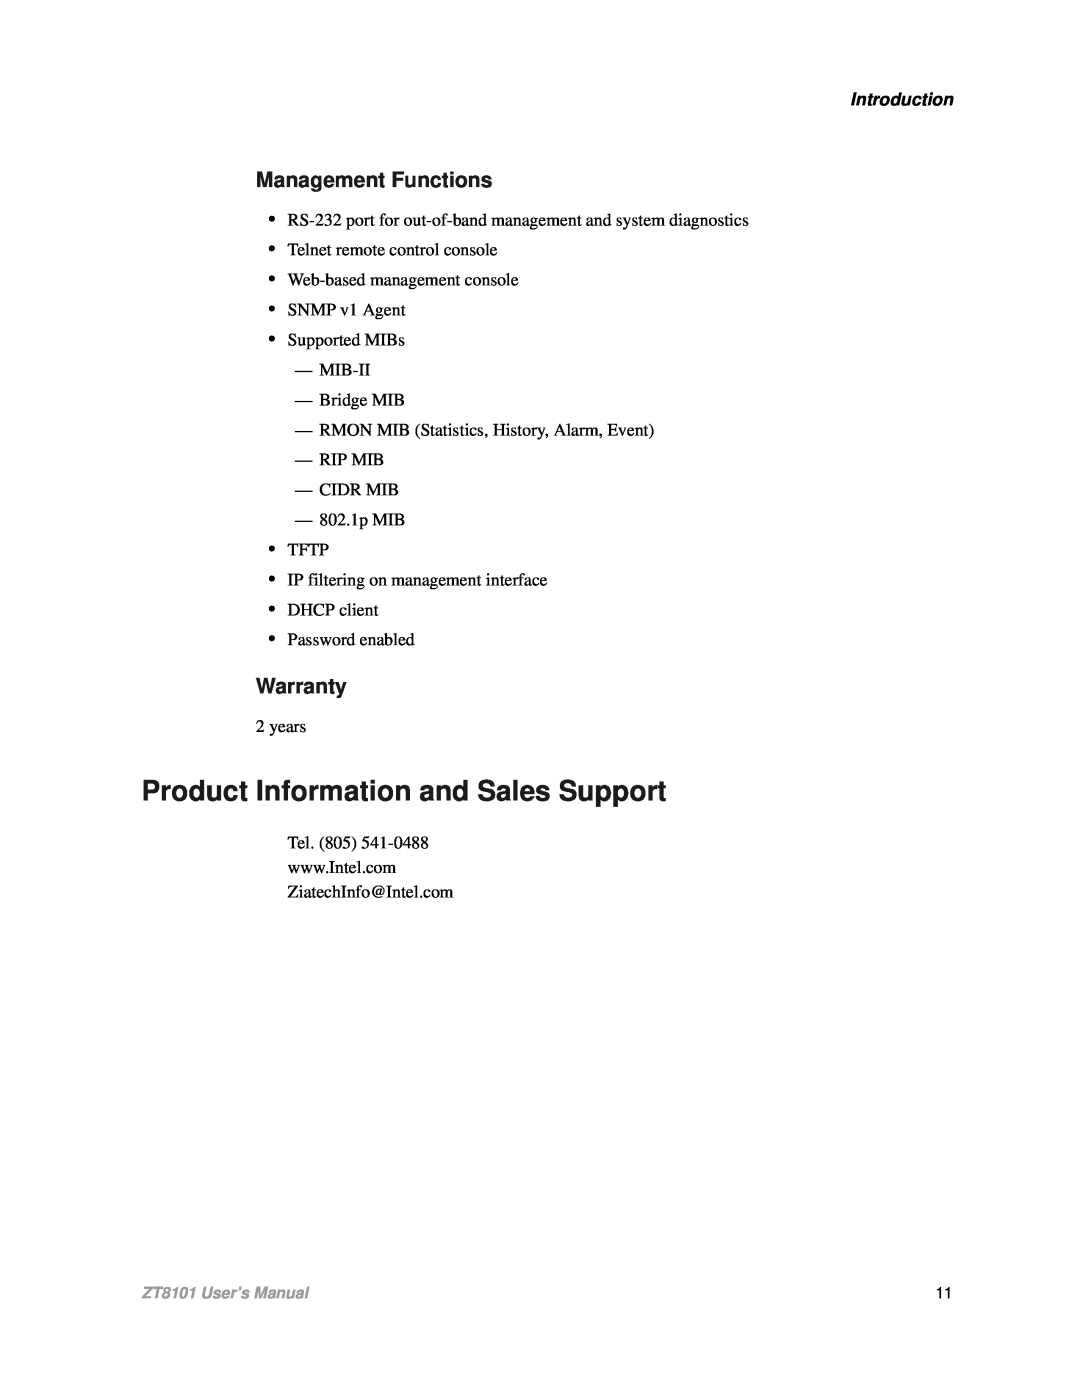 Intel ZT8101 user manual Product Information and Sales Support, Management Functions, Warranty, Introduction 